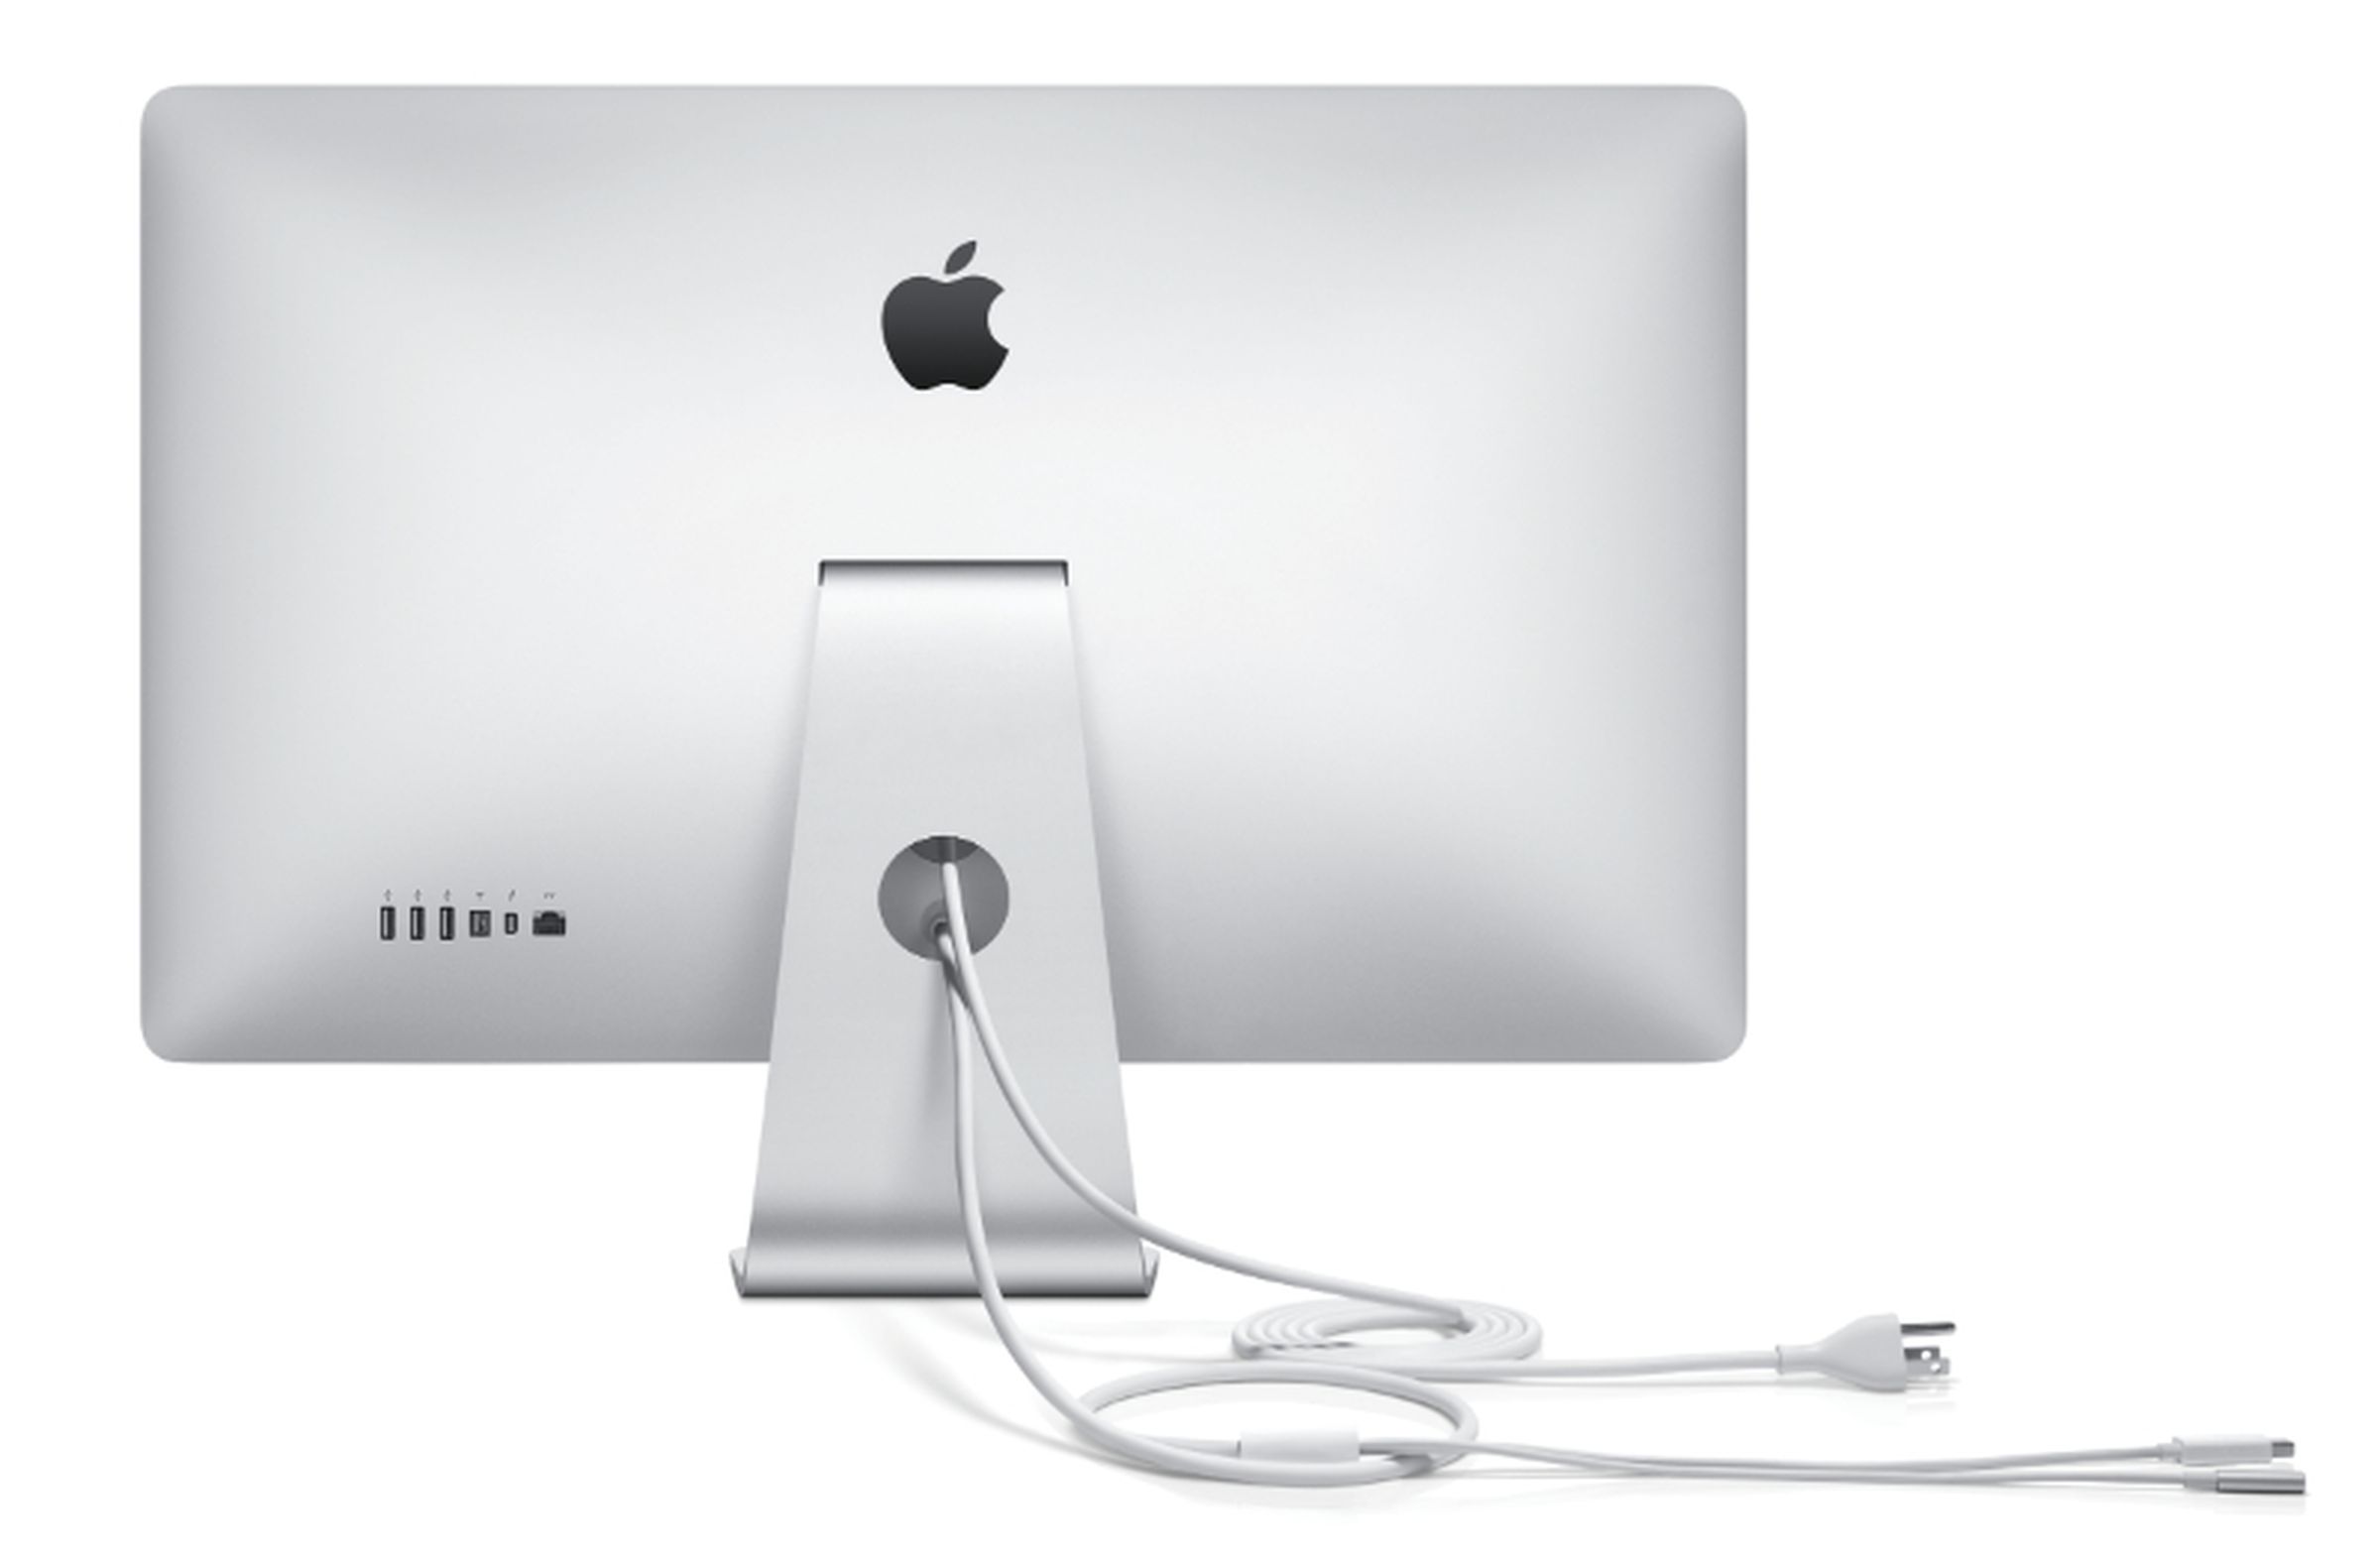 Apple 27-inch Thunderbolt Display now available: FaceTime HD camera, 2.1 speaker system, and $999 price tag